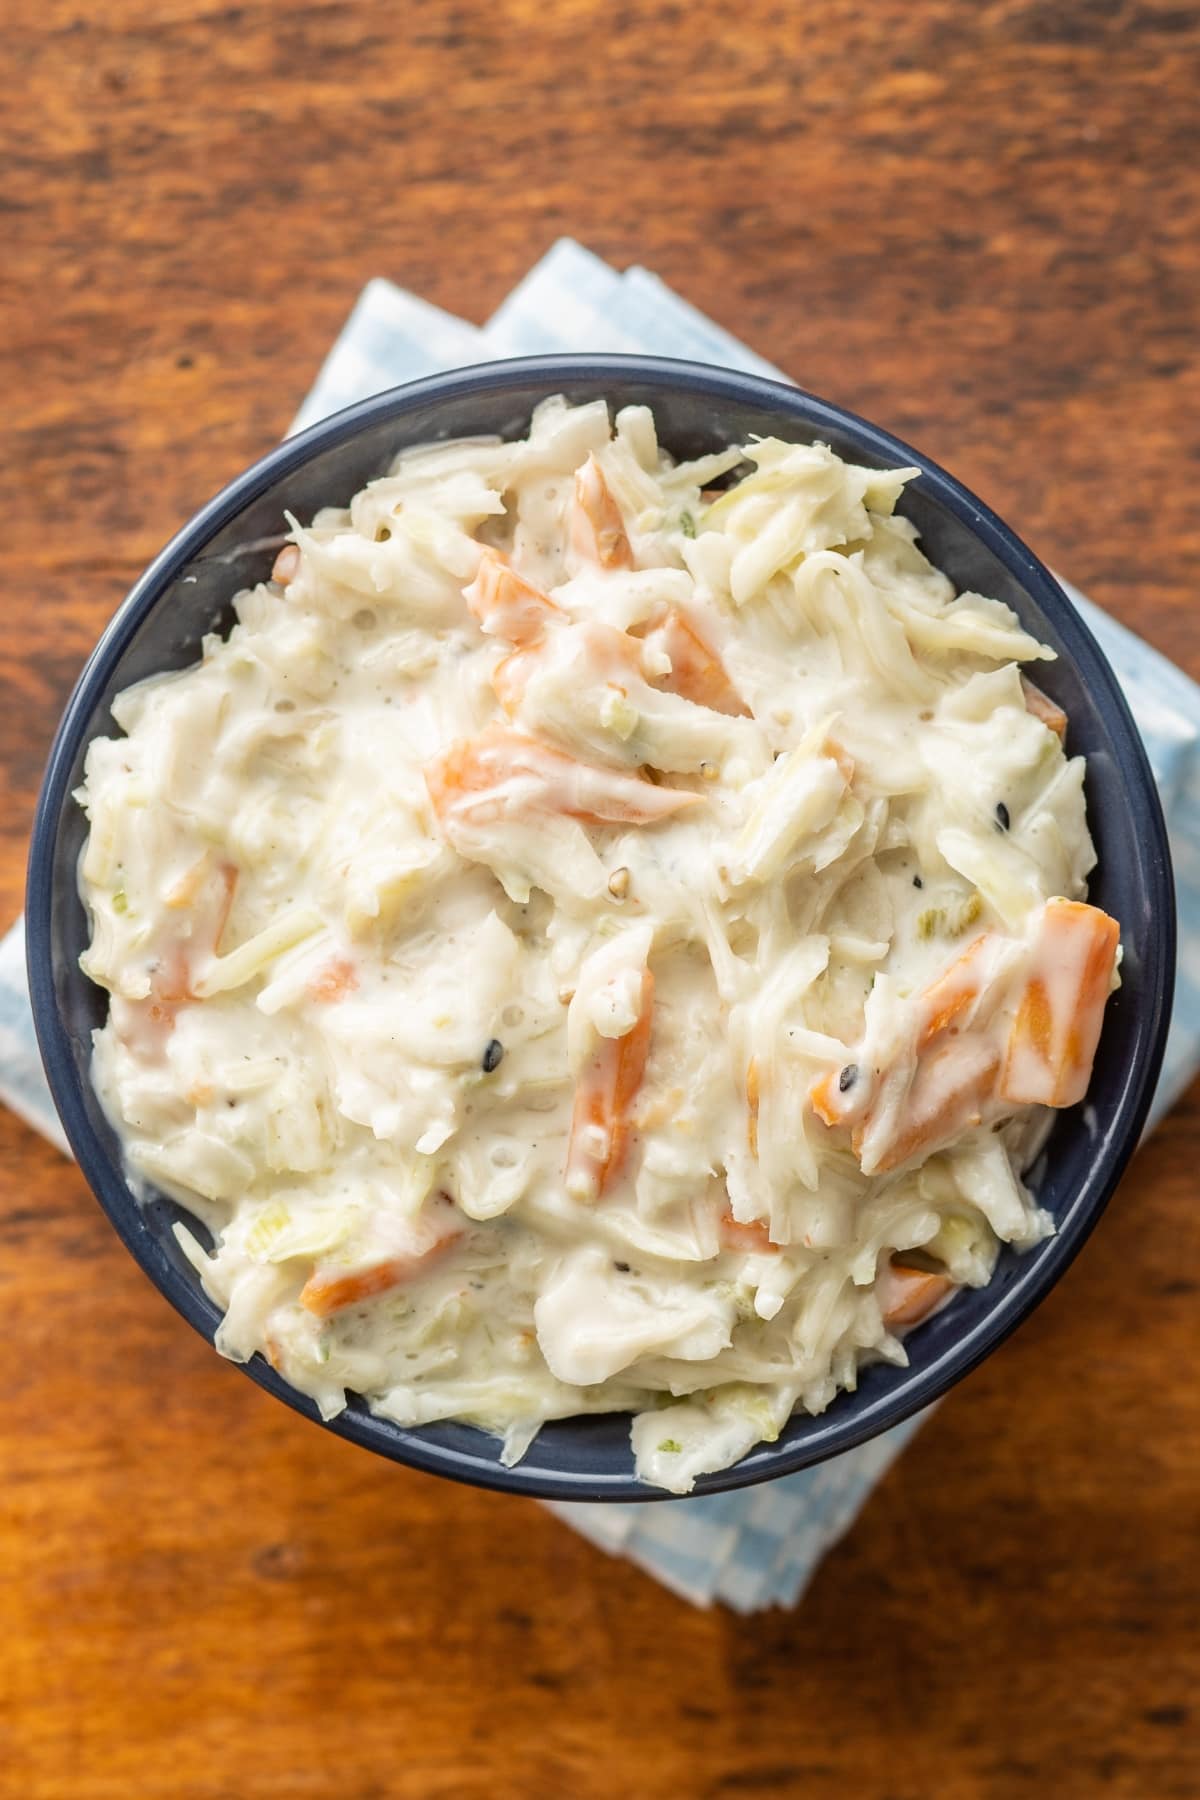 Top View of Creamy Coleslaw with Cabbage and Carrots